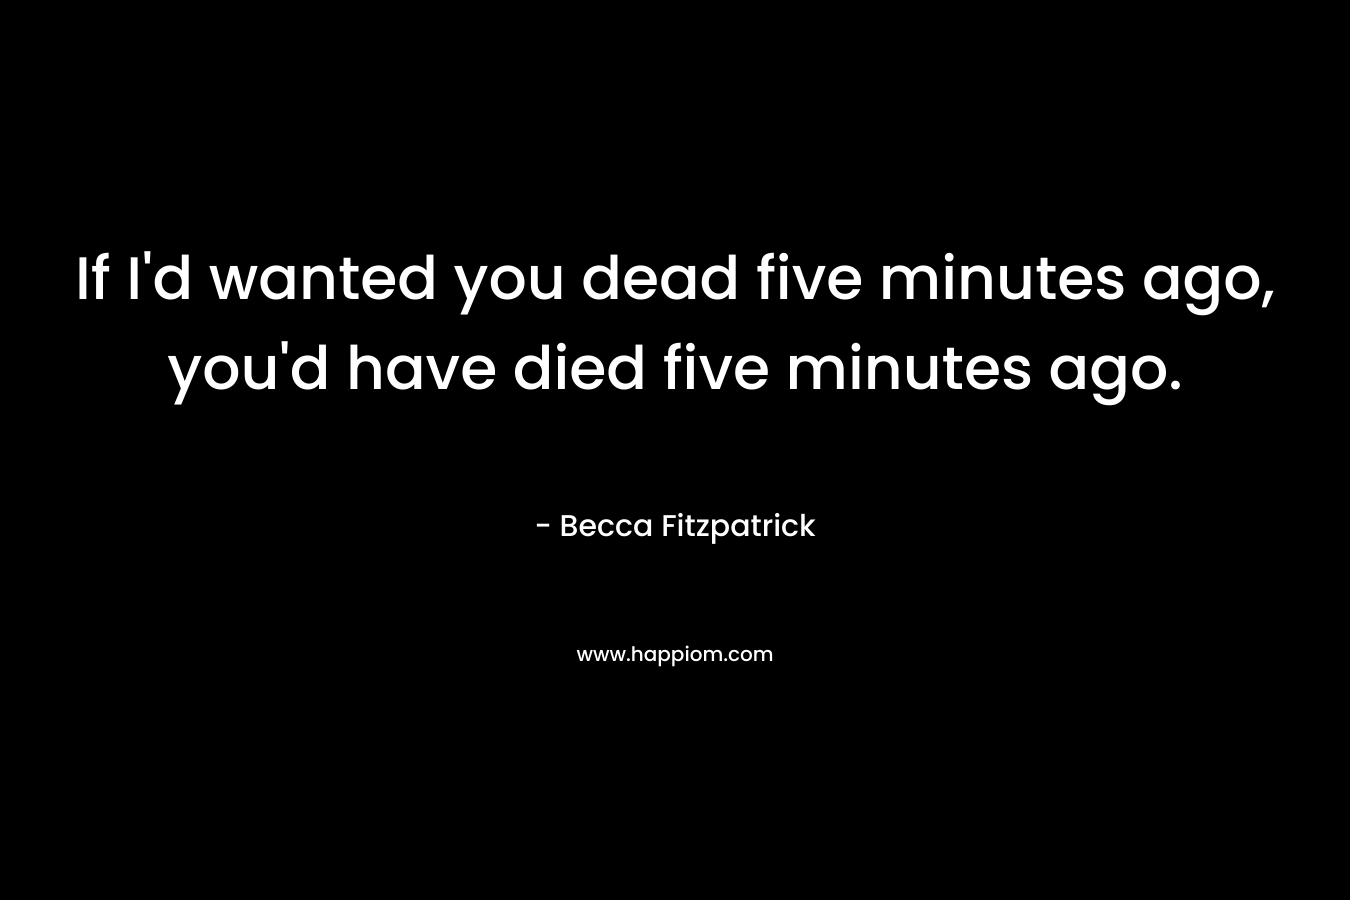 If I’d wanted you dead five minutes ago, you’d have died five minutes ago. – Becca Fitzpatrick